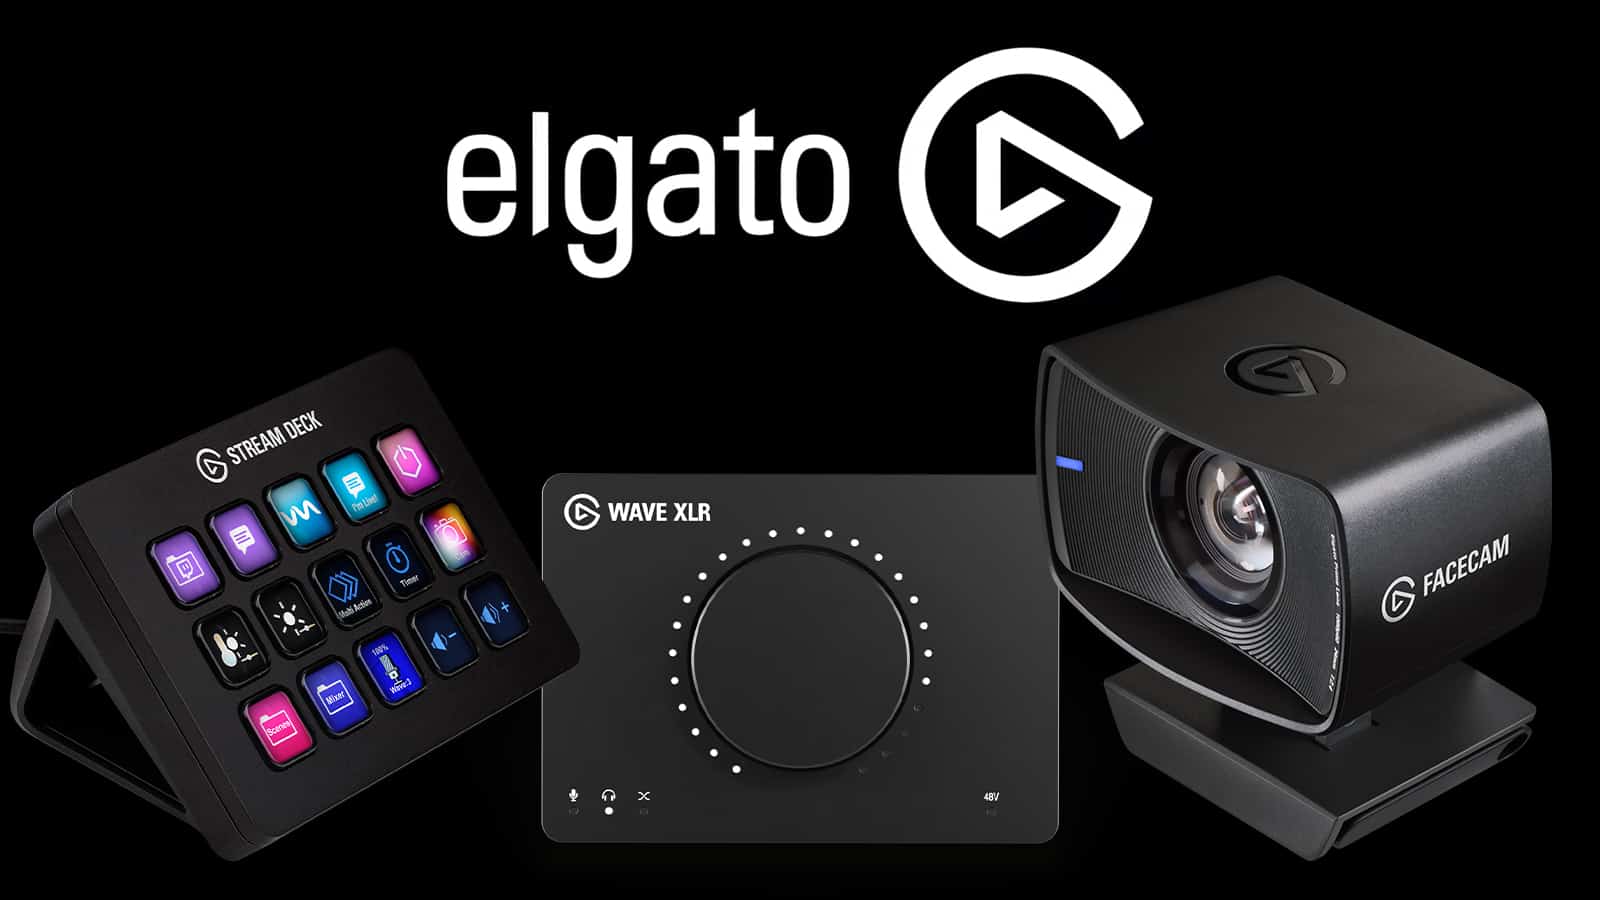 https://editors.dexerto.com/wp-content/uploads/2021/07/14/Everything-you-need-to-know-about-Elgatos-new-stream-line-Facecam-Stream-deck-mk-Wave-XLR.jpg